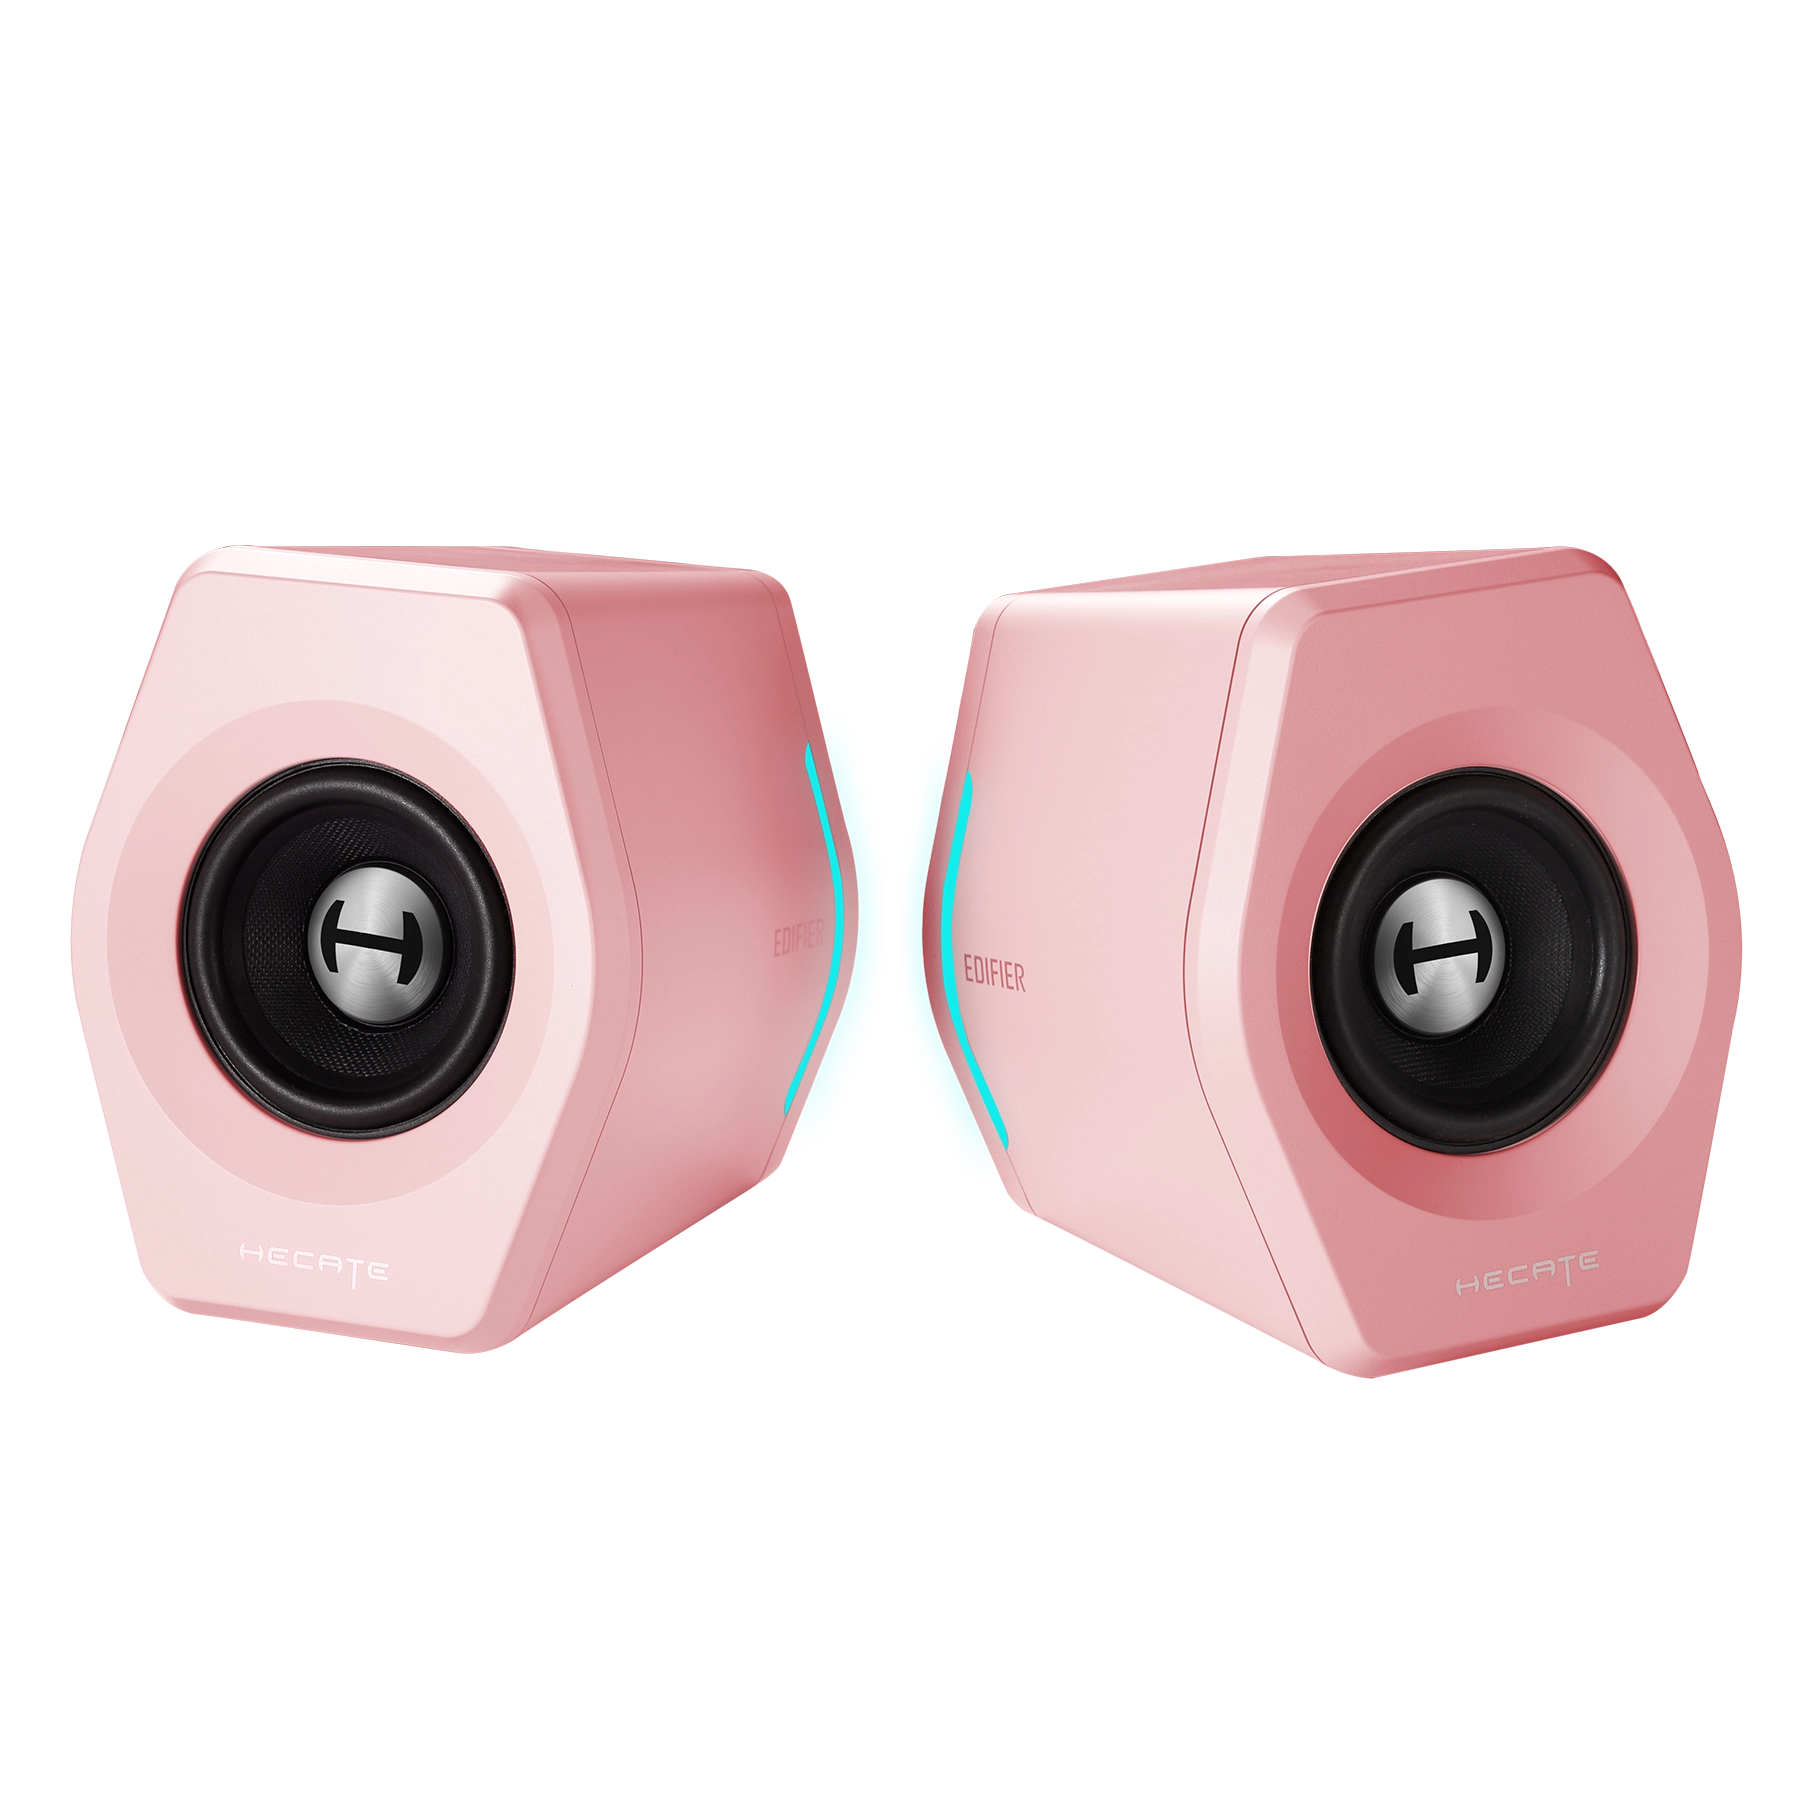 G2000 Speaker Product Picture pink_